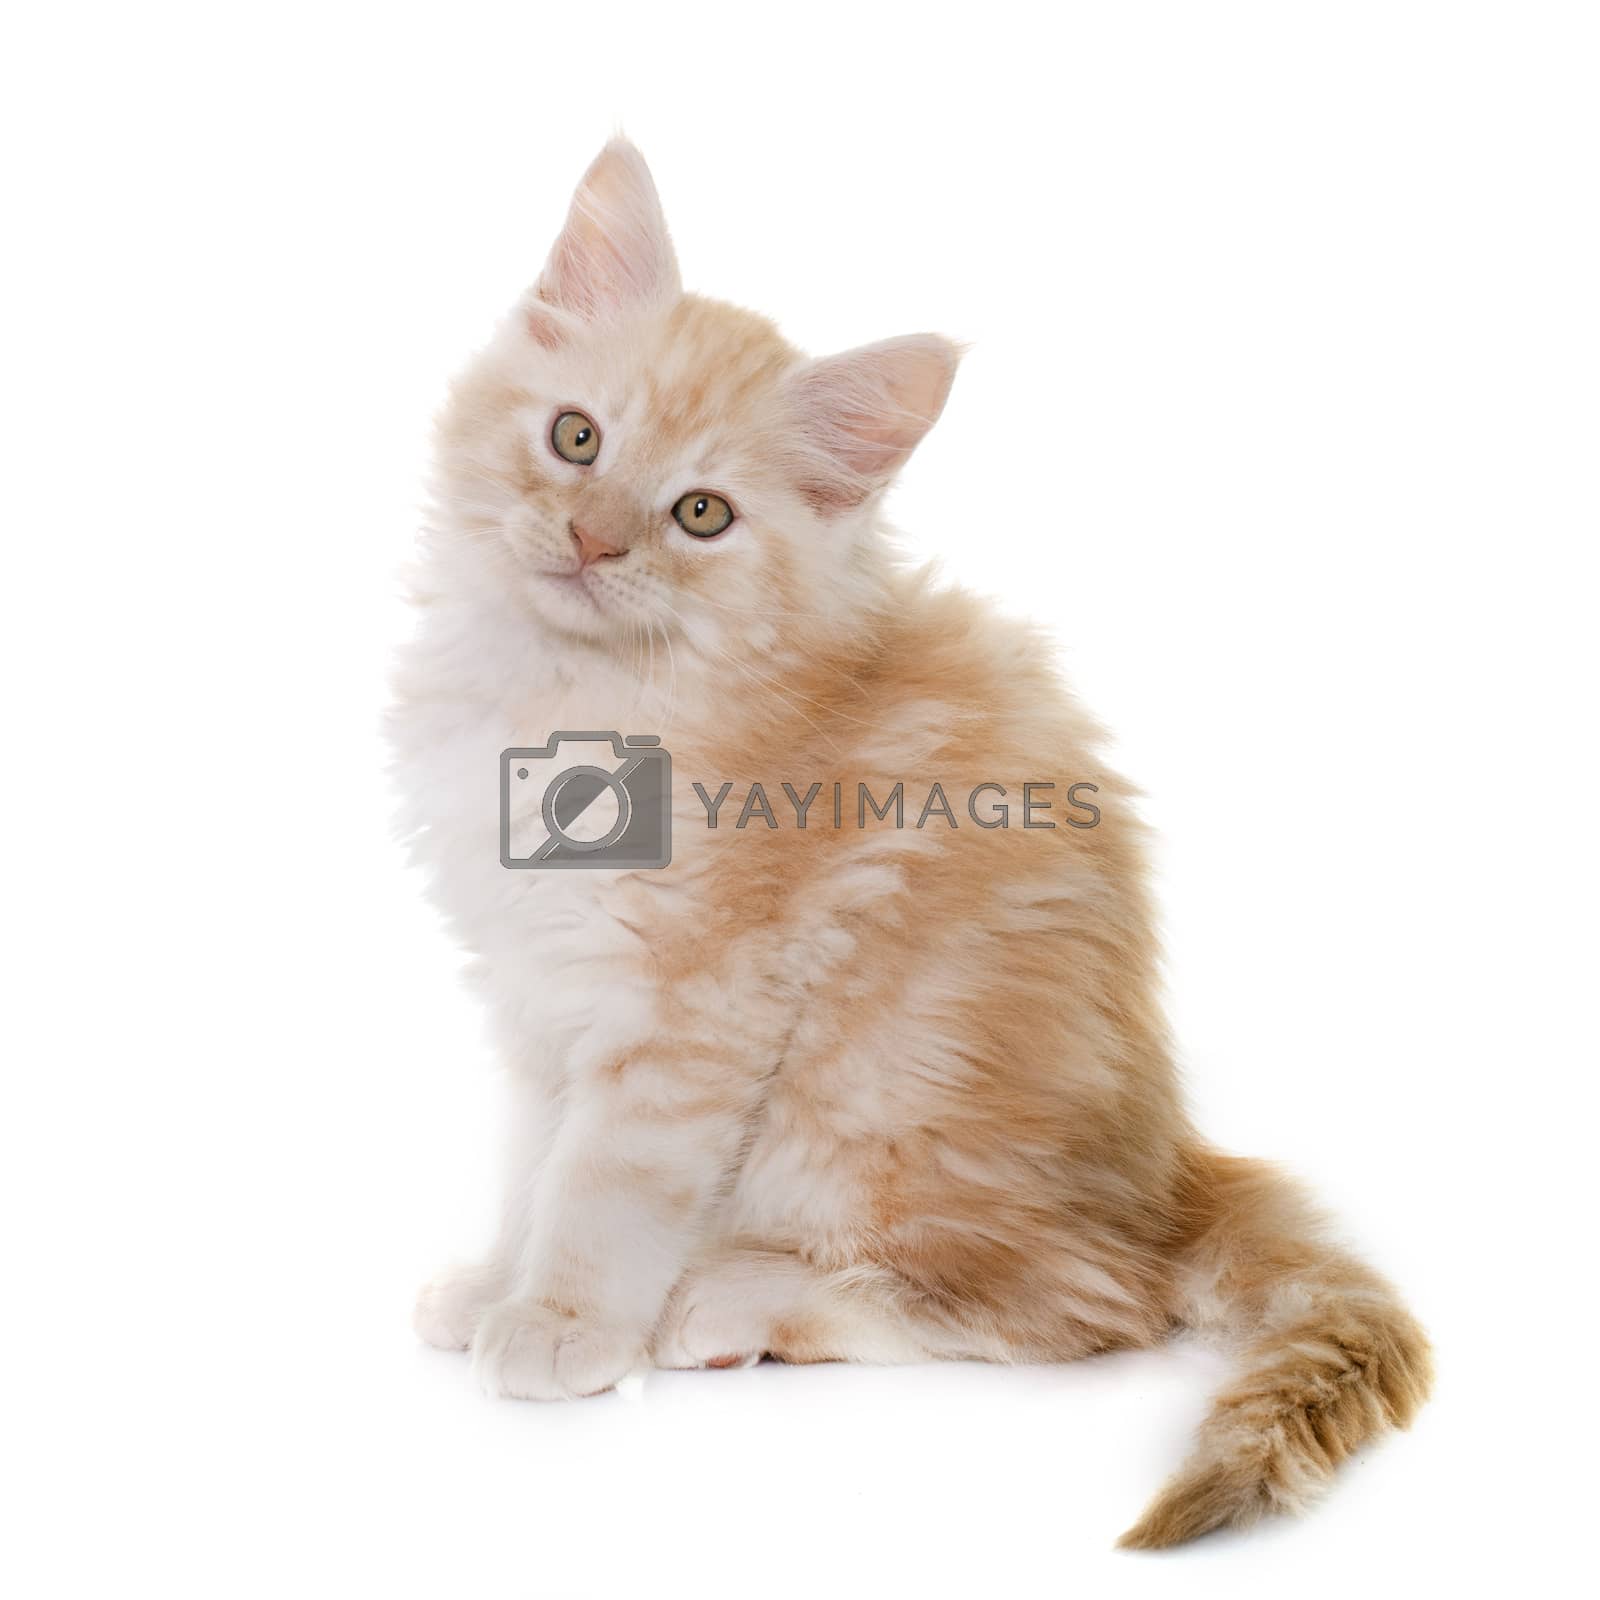 Royalty free image of maine coon kitten by cynoclub